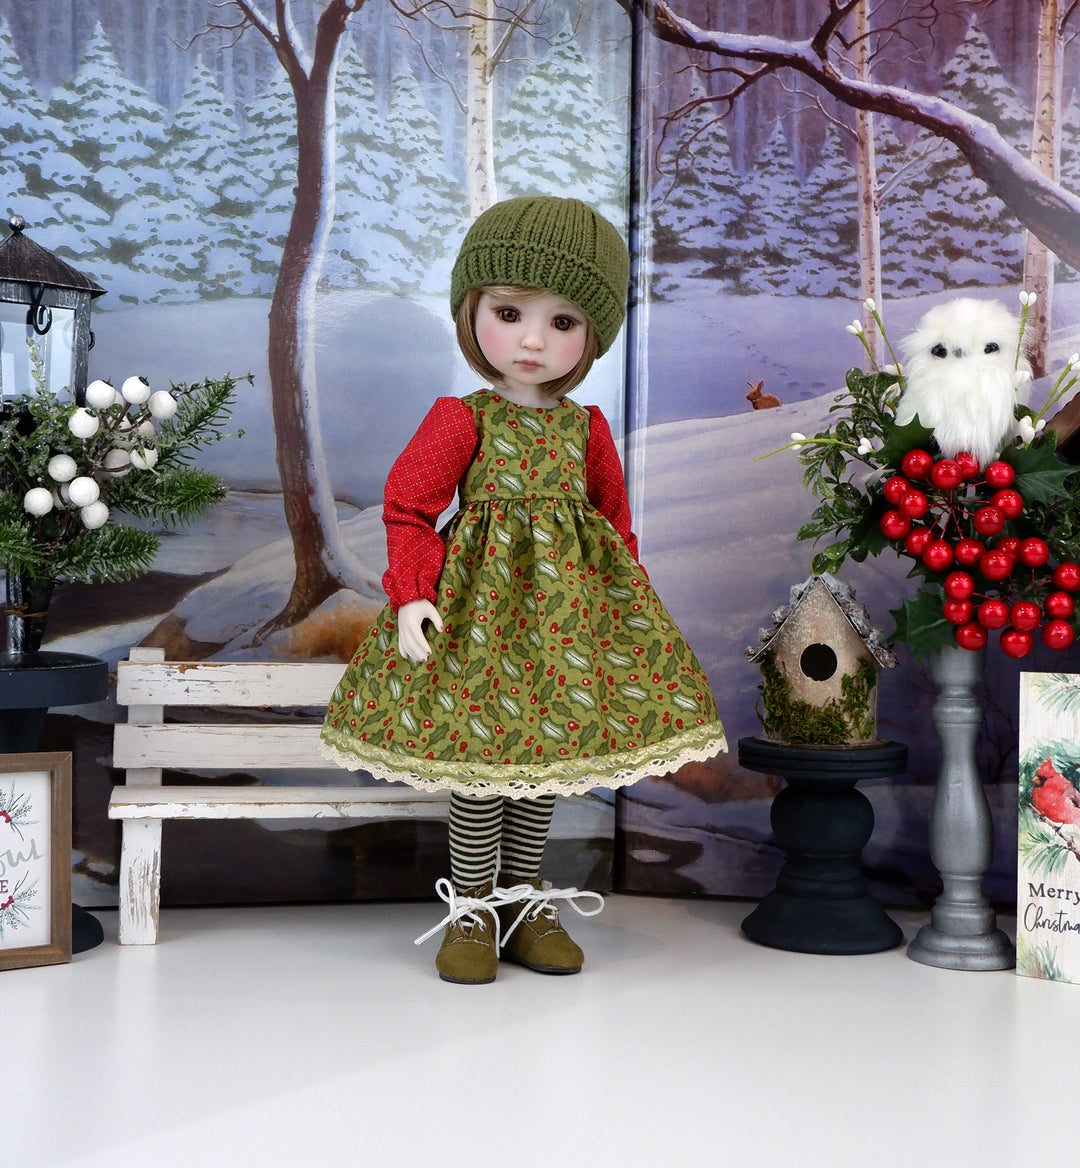 Plentiful Holly - dress ensemble with boots for Ruby Red Fashion Friends doll